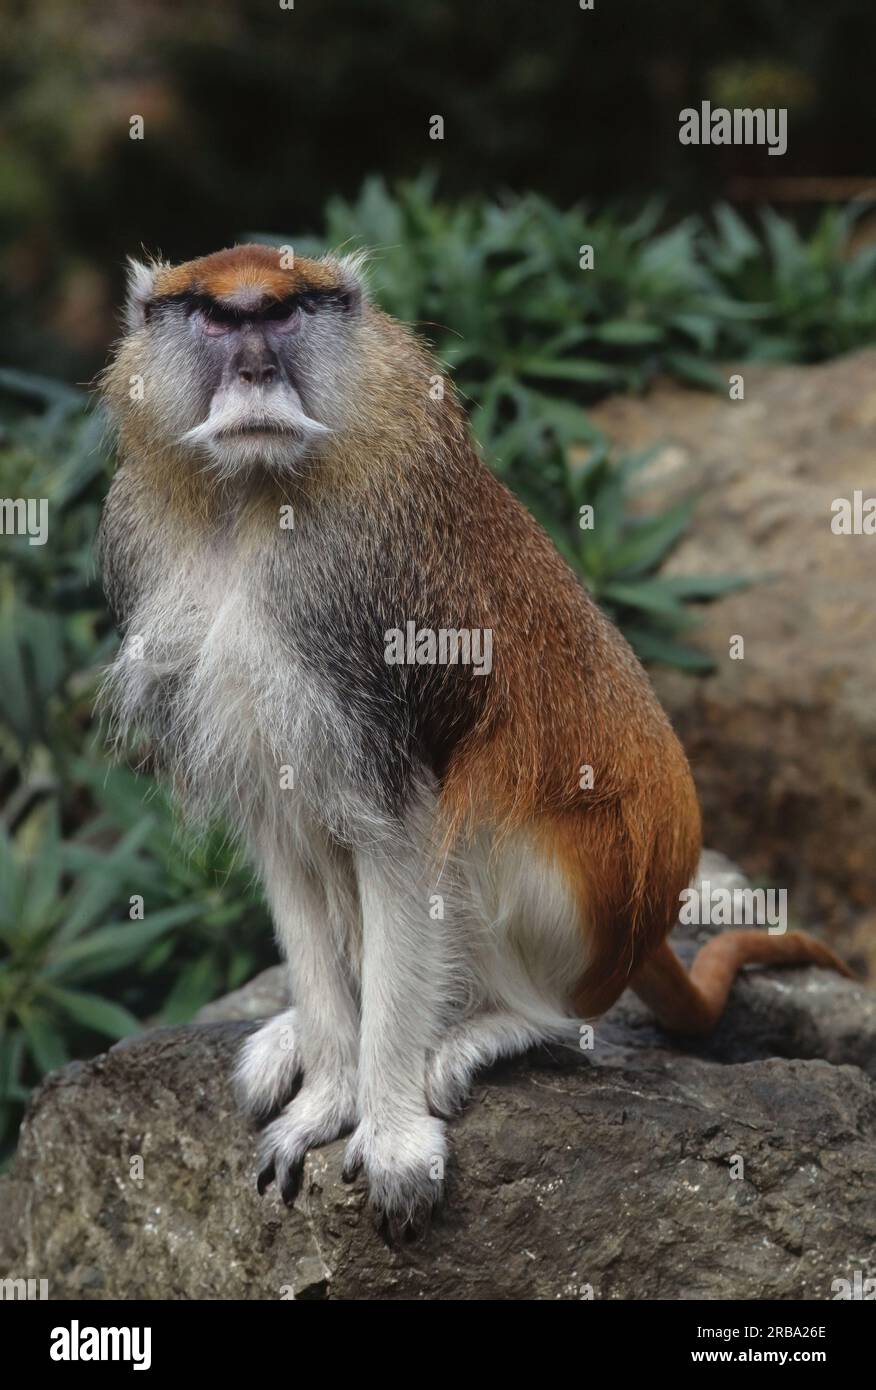 The common patas monkey (Erythrocebus patas), also known as the wadi monkey or hussar monkey, is a ground-dwelling monkey distributed over semi-arid a Stock Photo